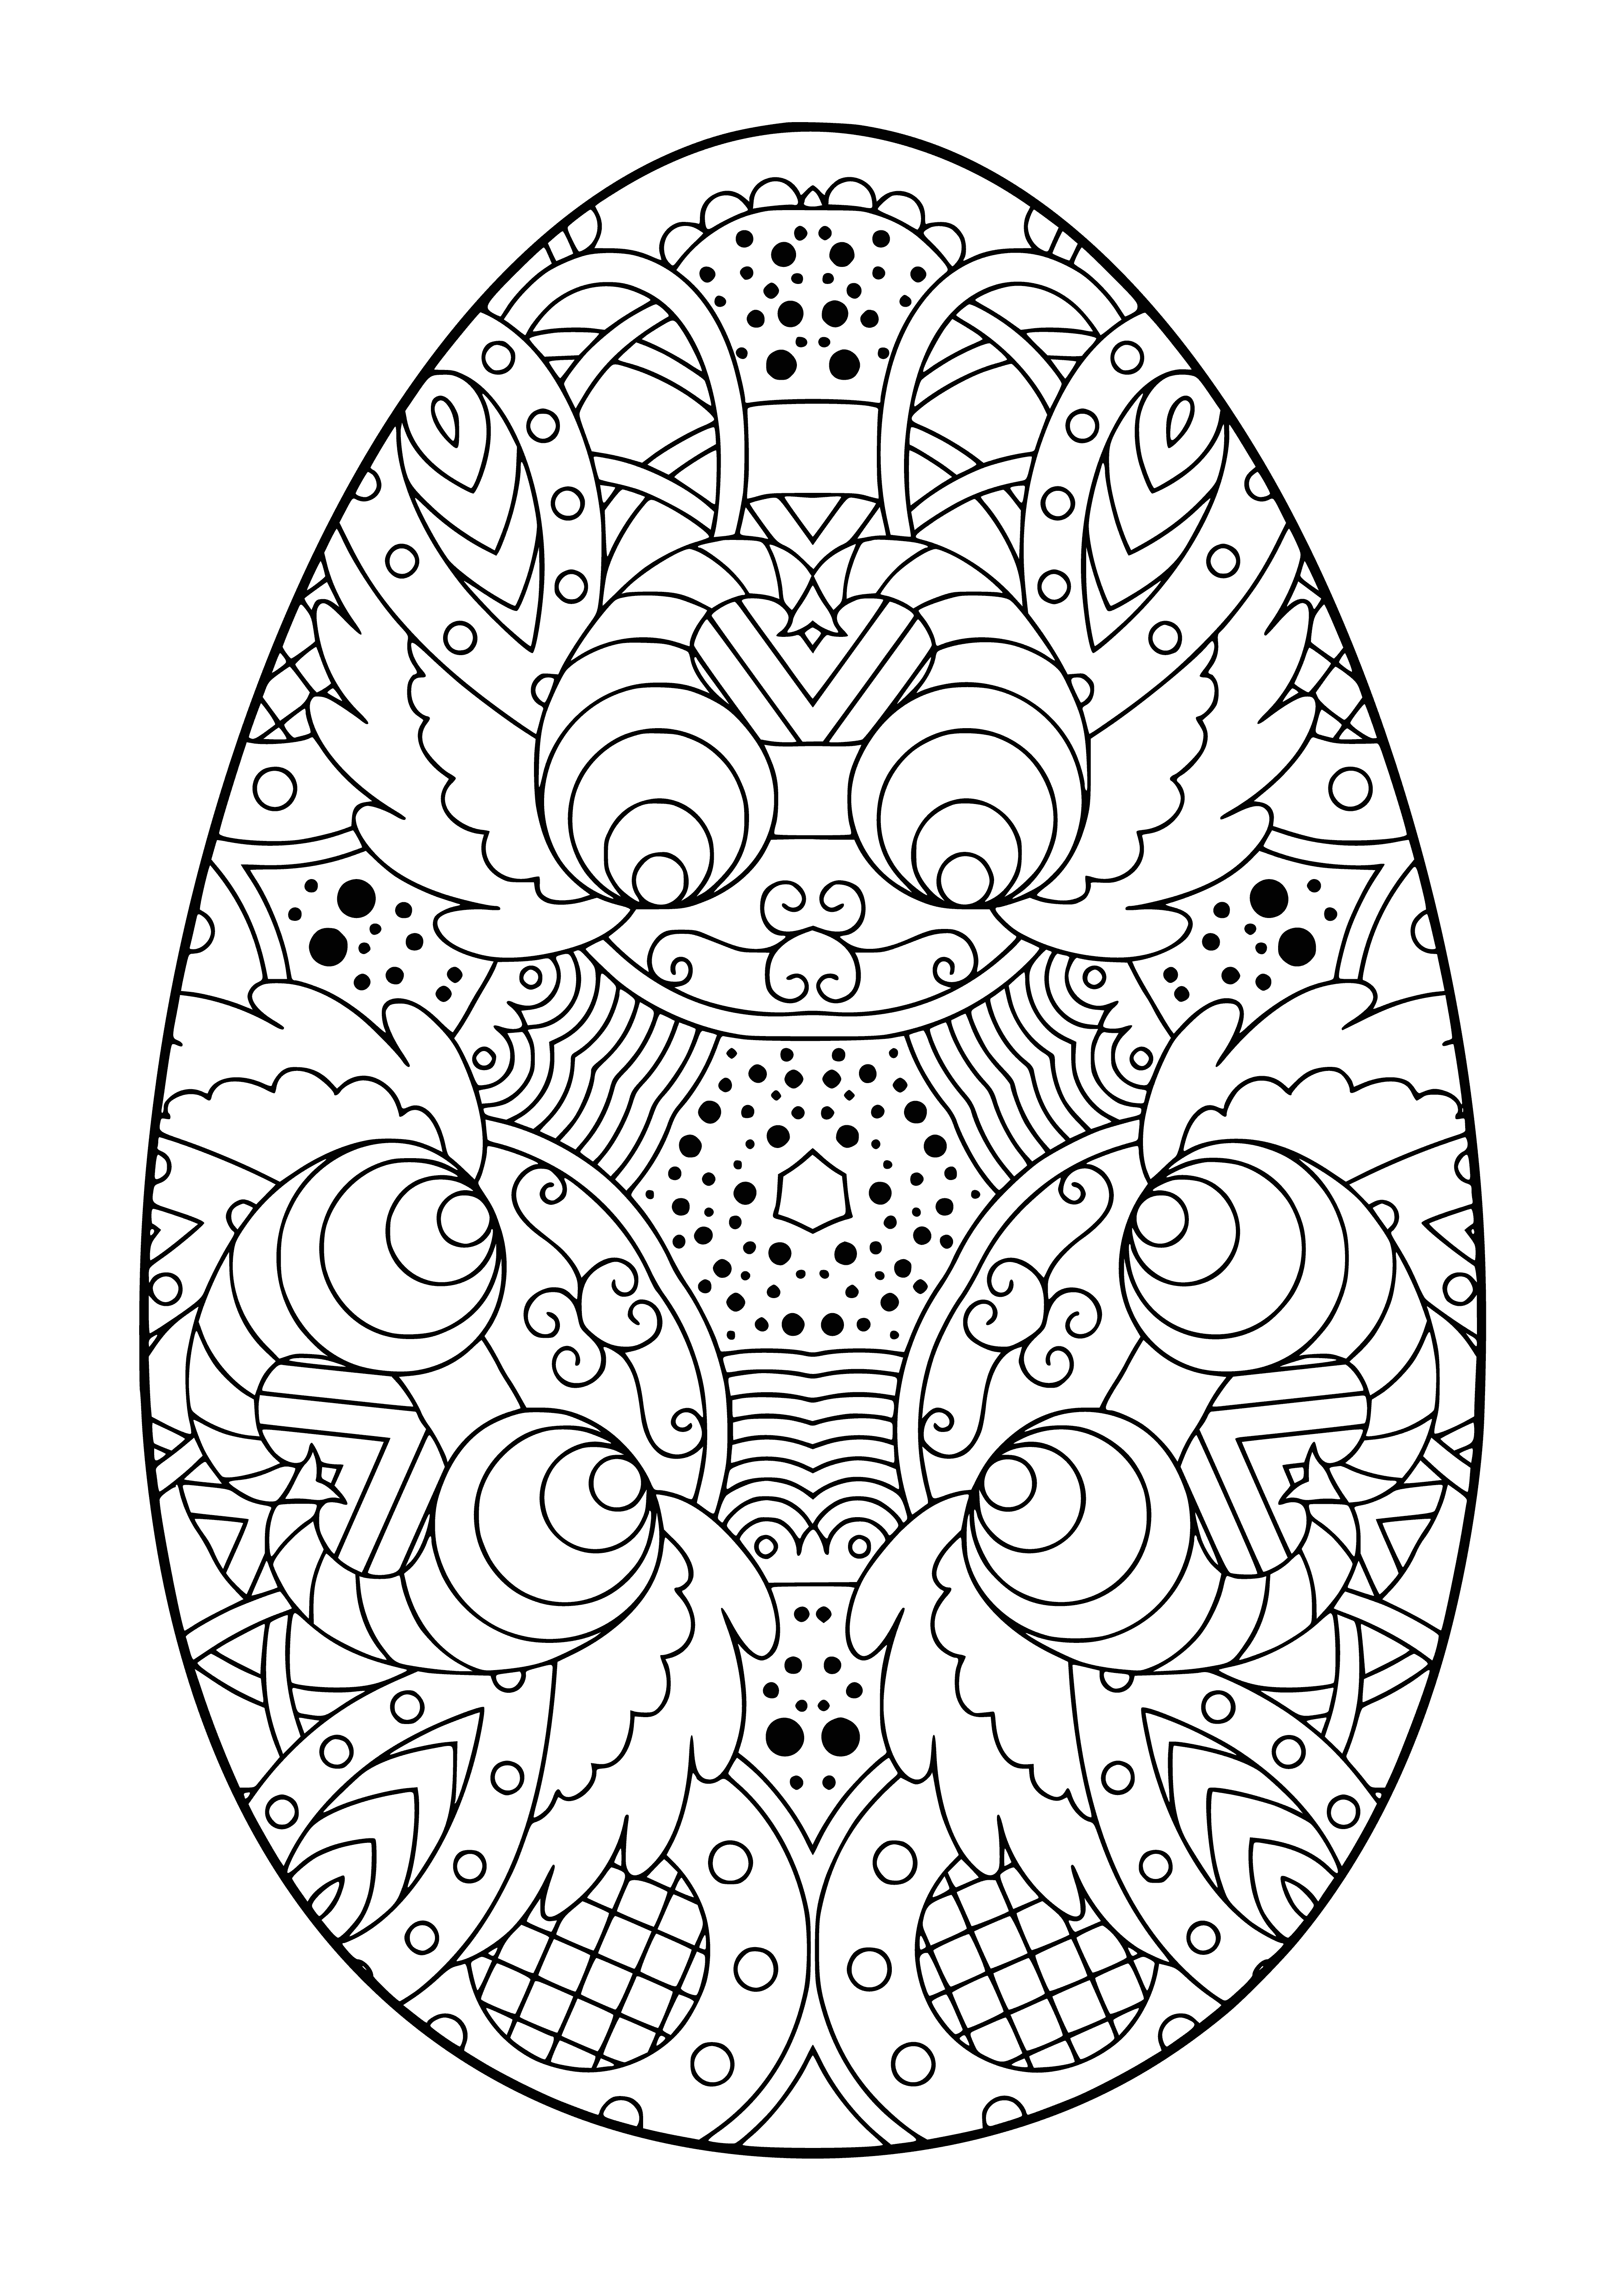 coloring page: Coloring page of Easter egg with patterns and colors to decorate.